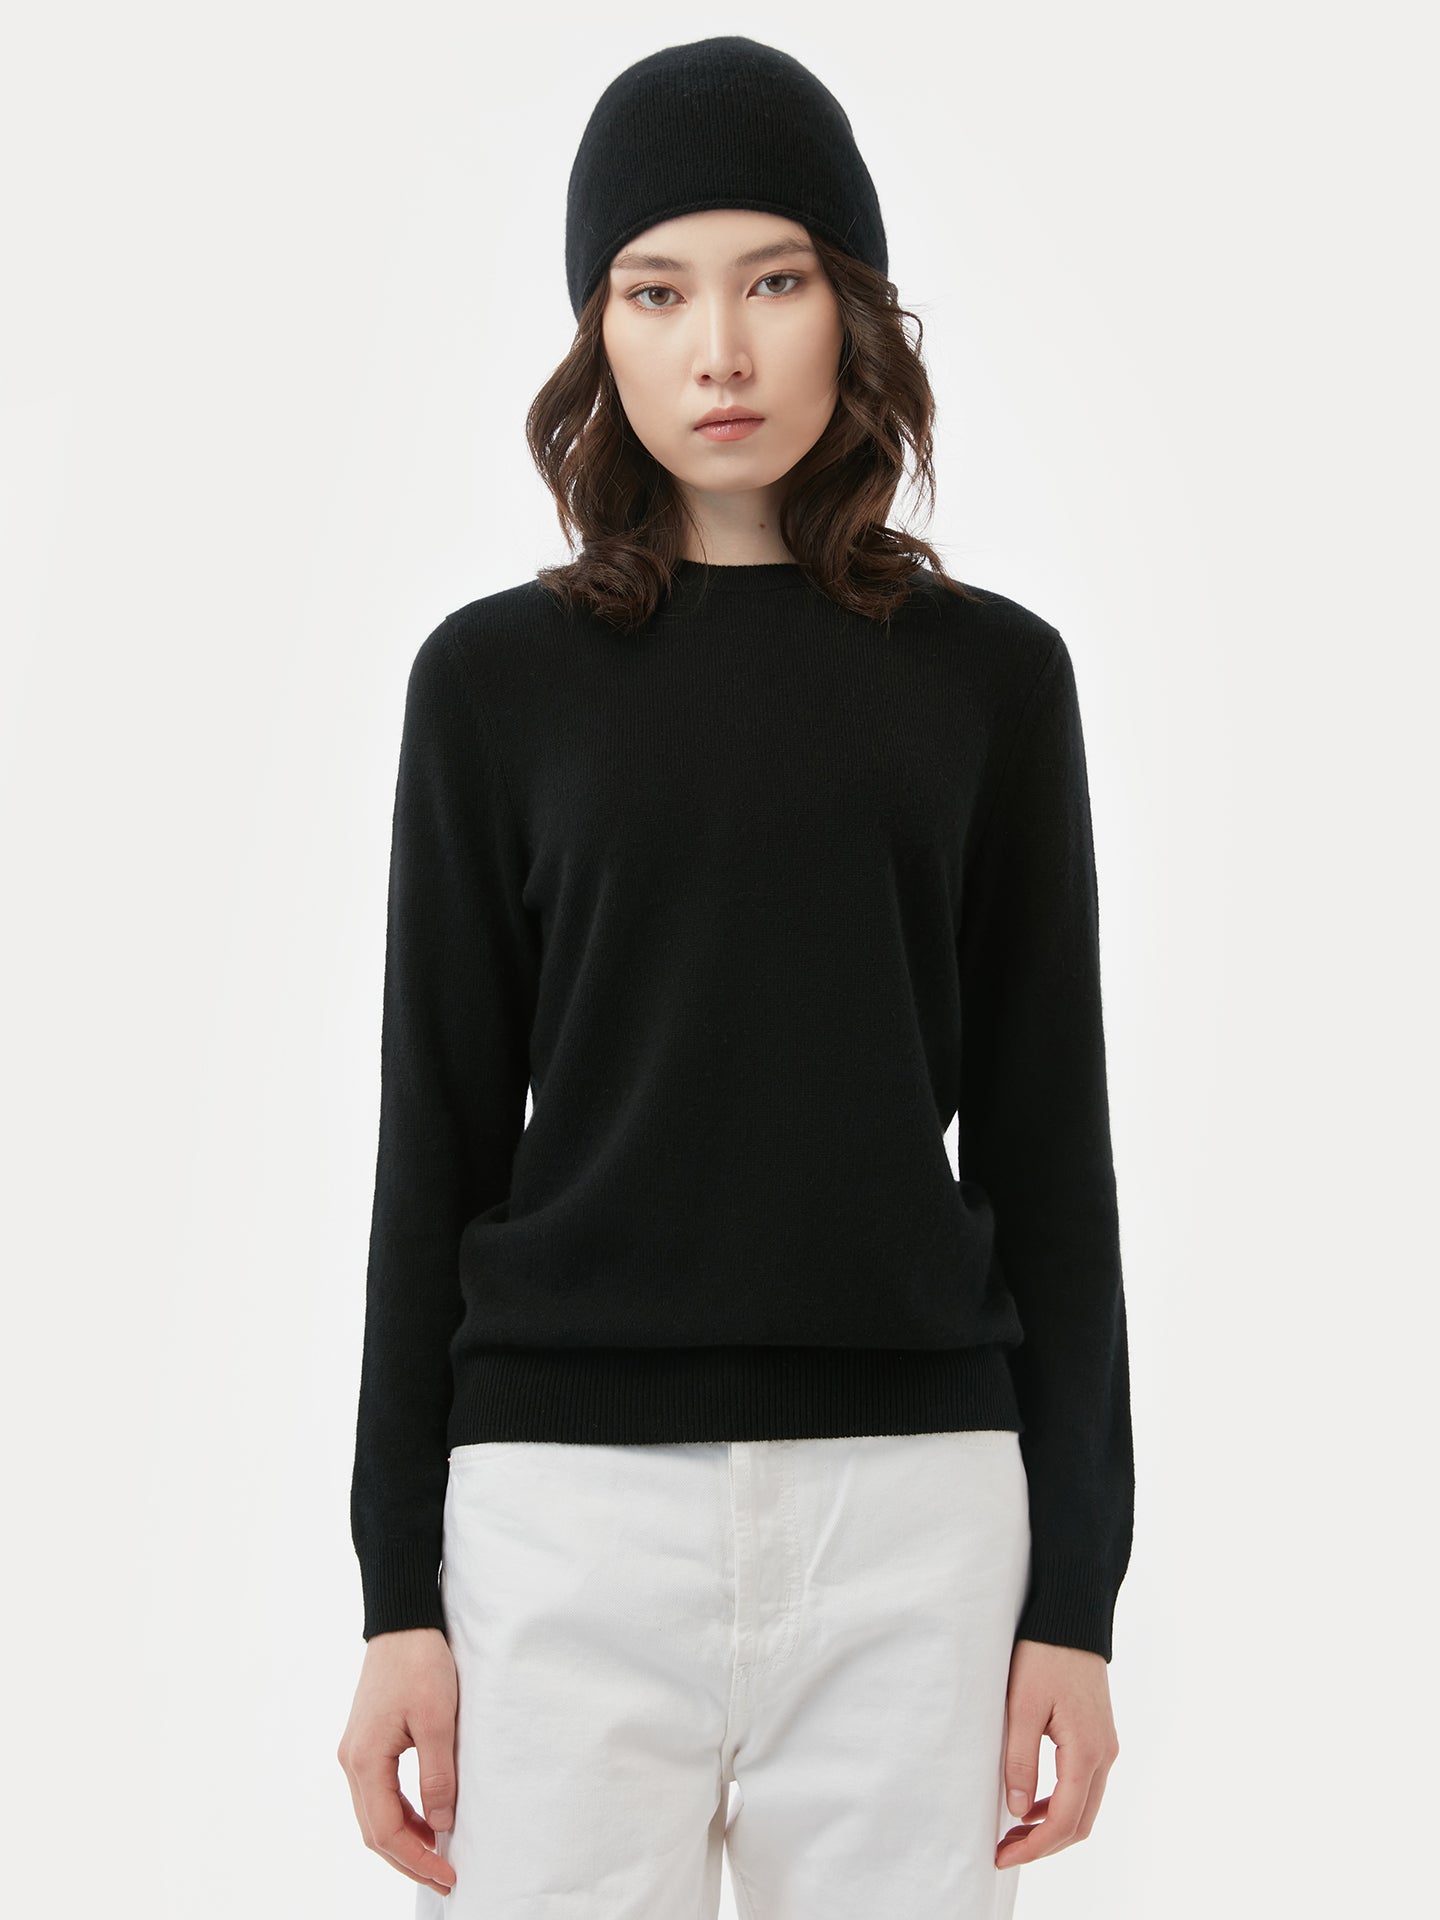 Cashmere Sweater and Hat Sets for Women